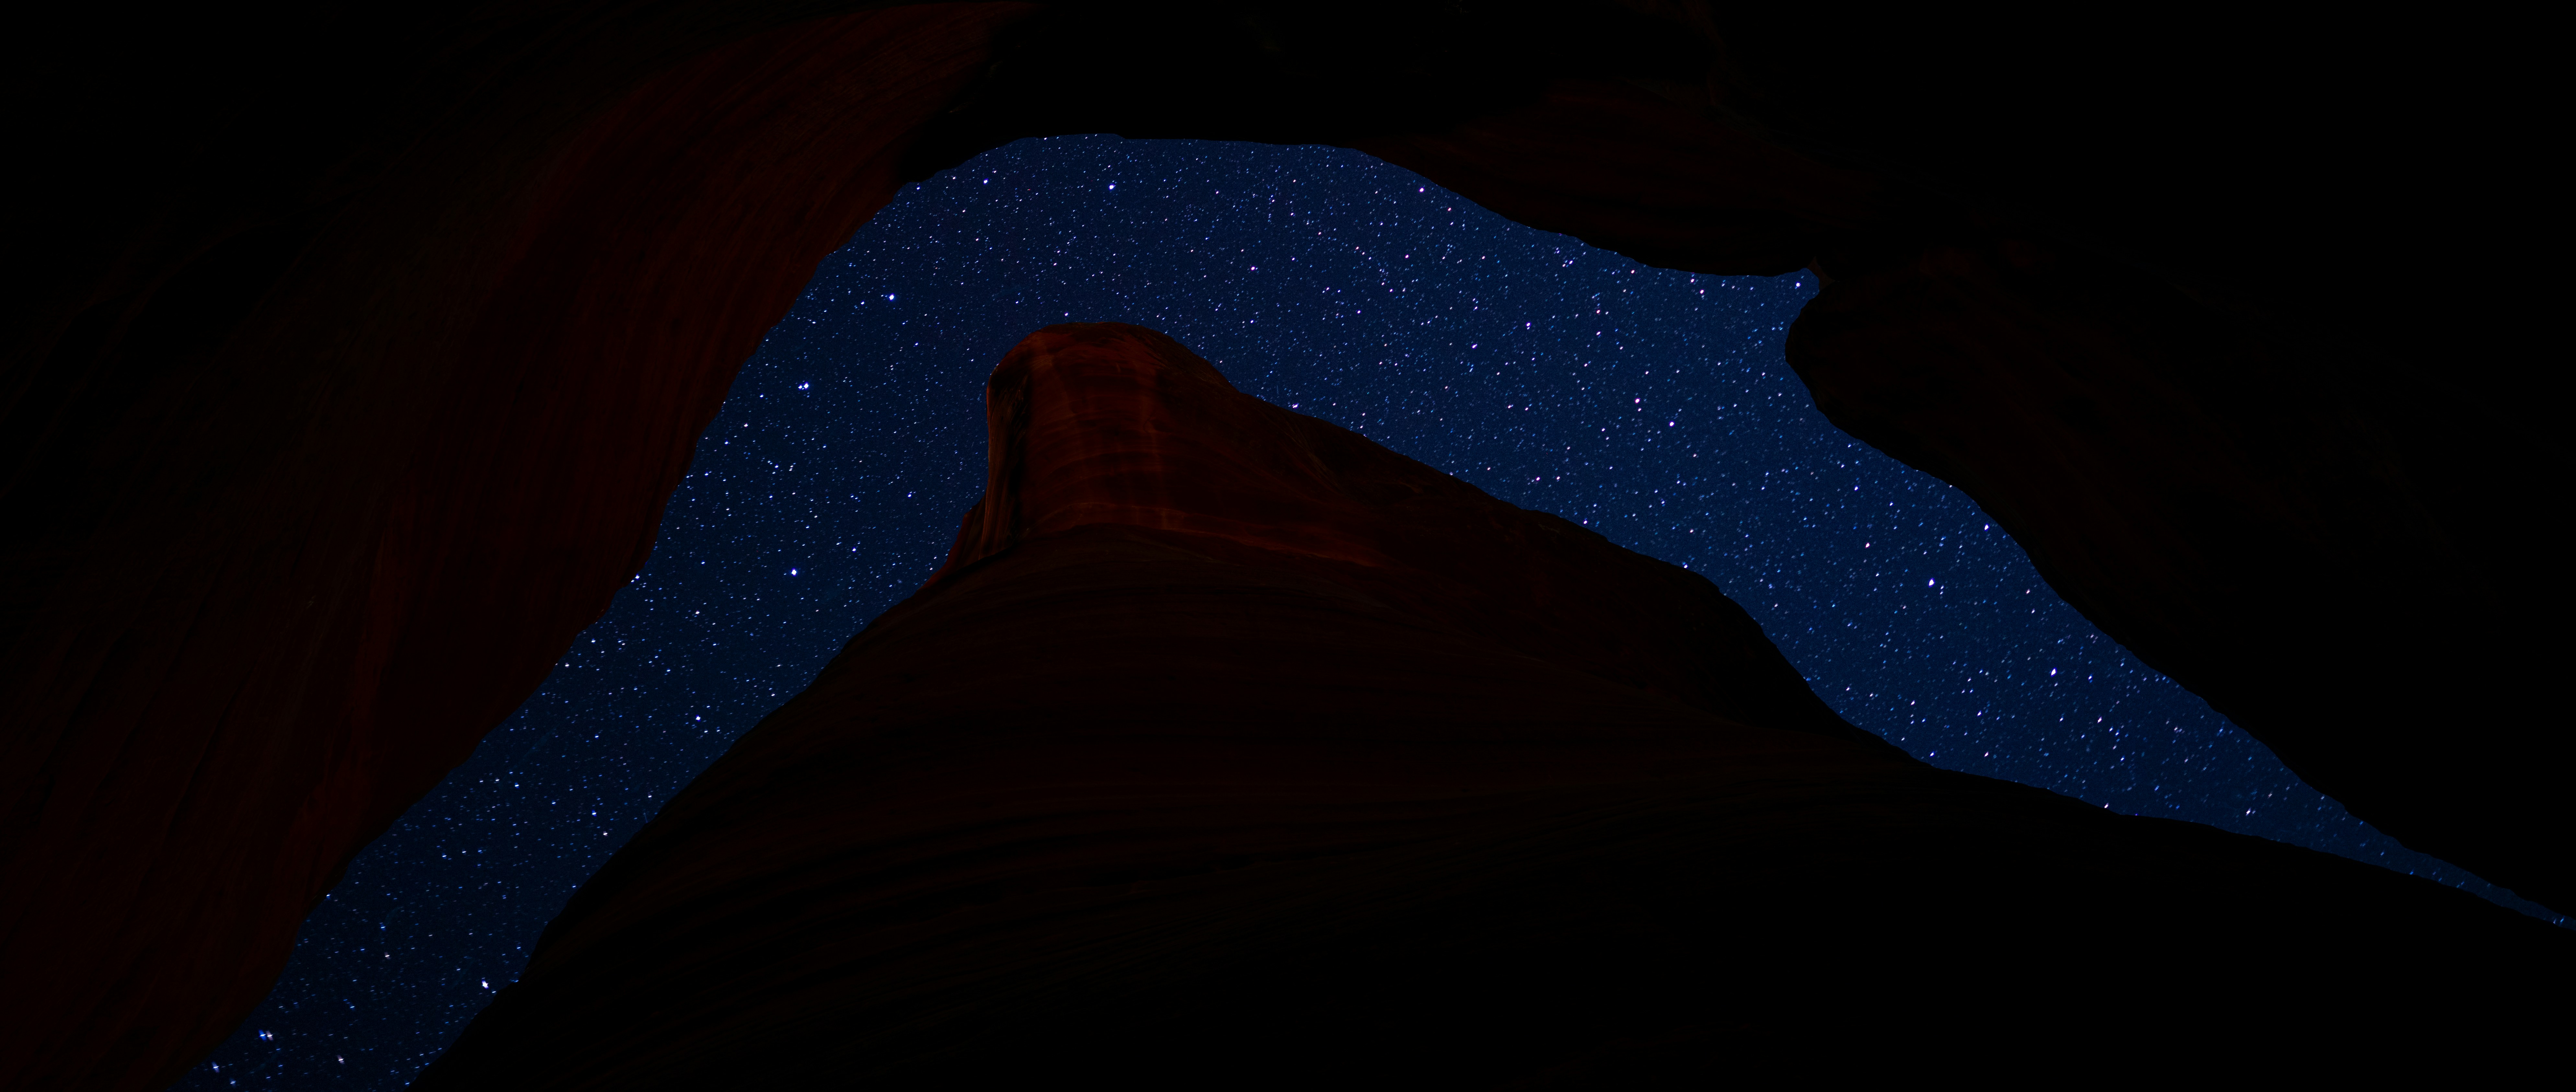 Slot canyons are amazing places, if you can get past the noises wind makes at night, the view of the stars is amazing.